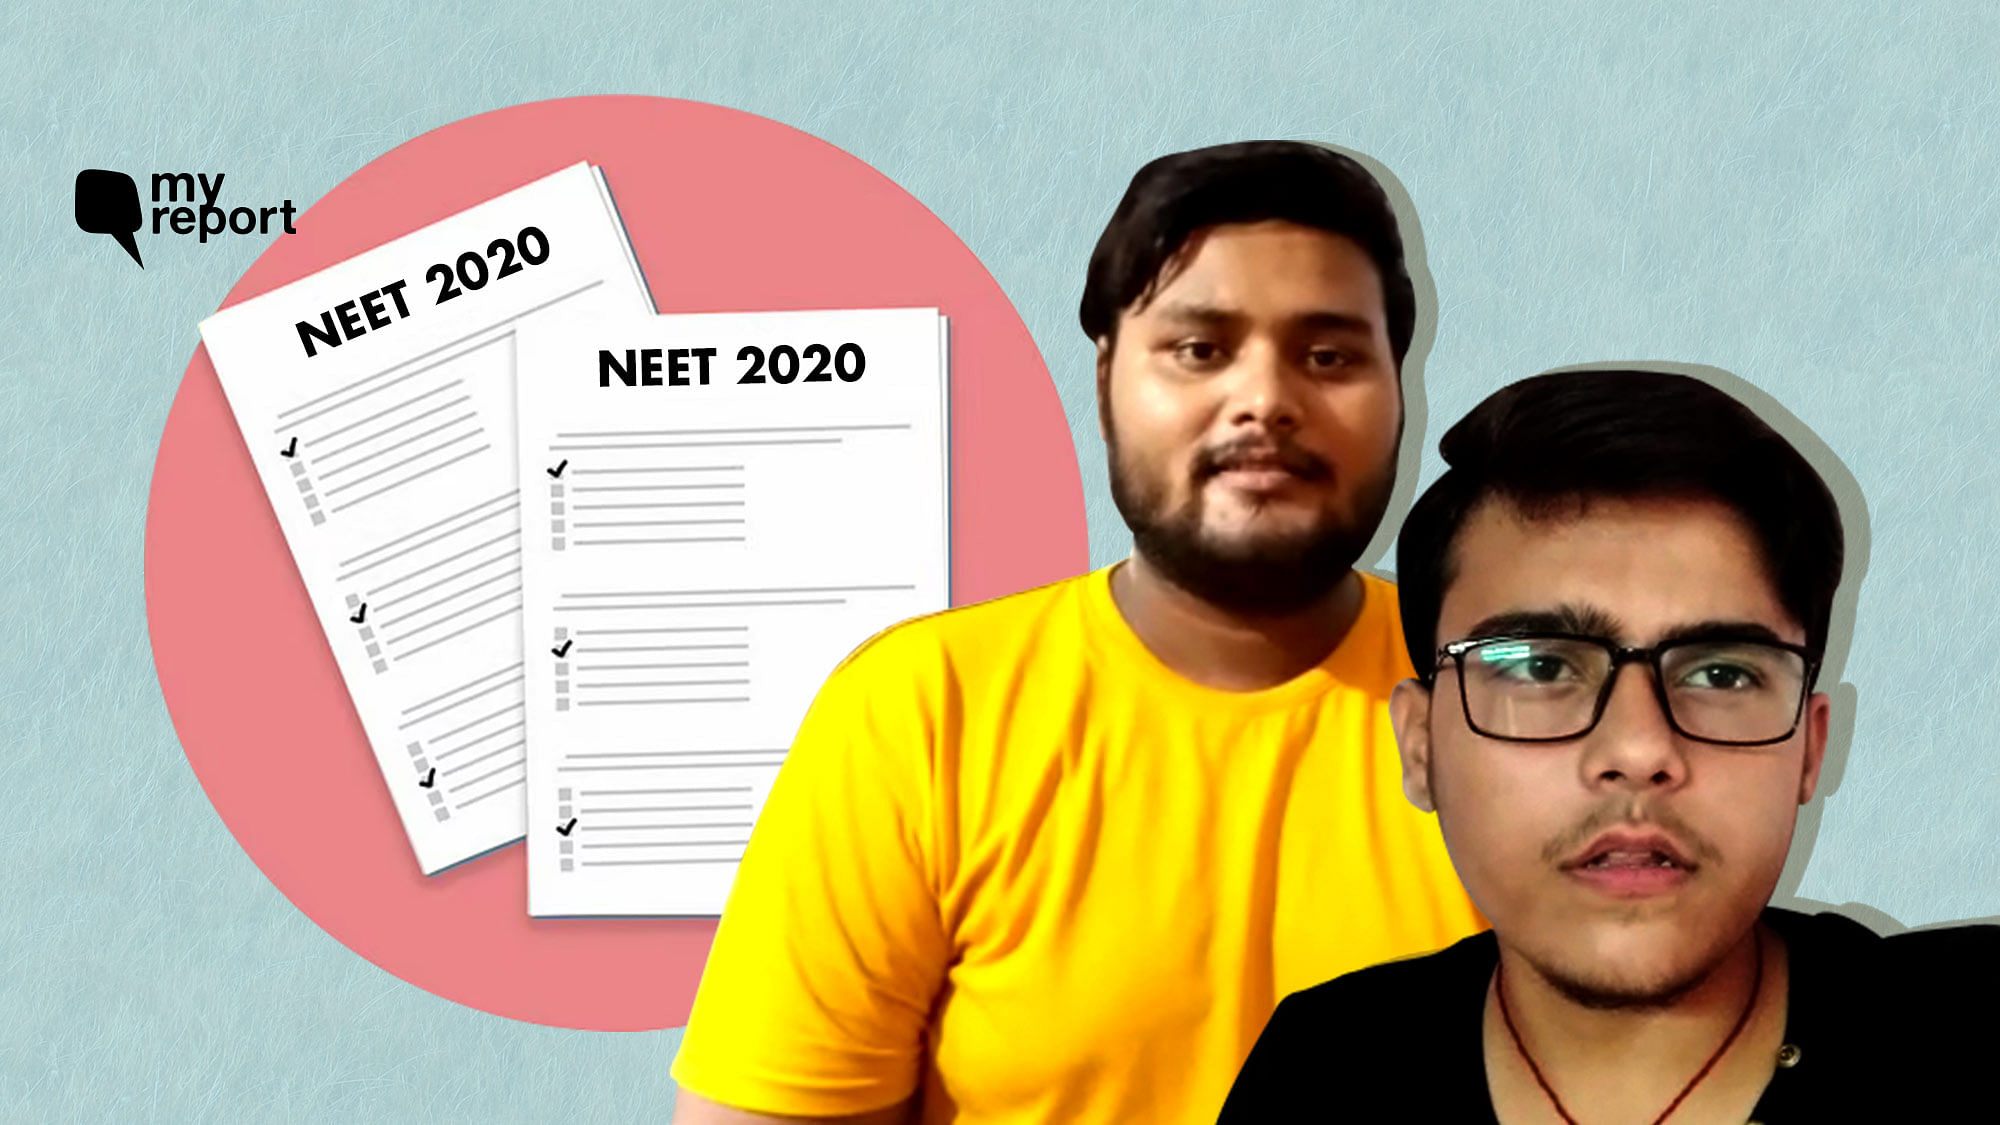 Three aspirants share why they were unable to appear for NEET 2020 on 13 September.